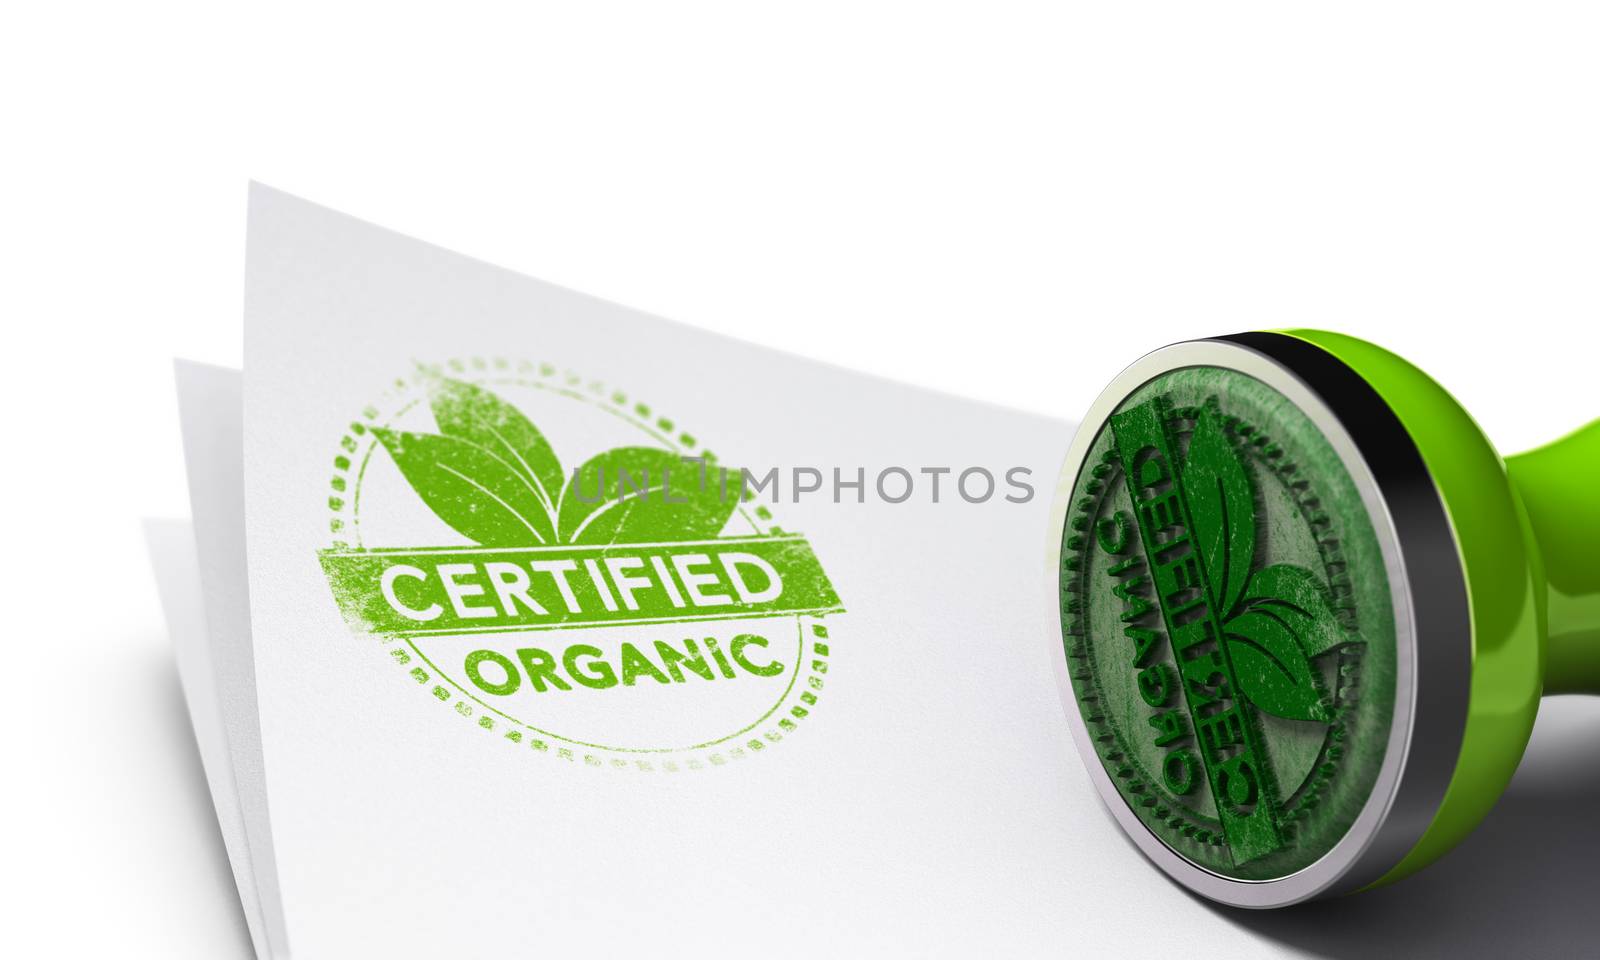 Rubber stamp over paper background with organic certified label symbol imprinted on it. Concept image for illustration of organic products.